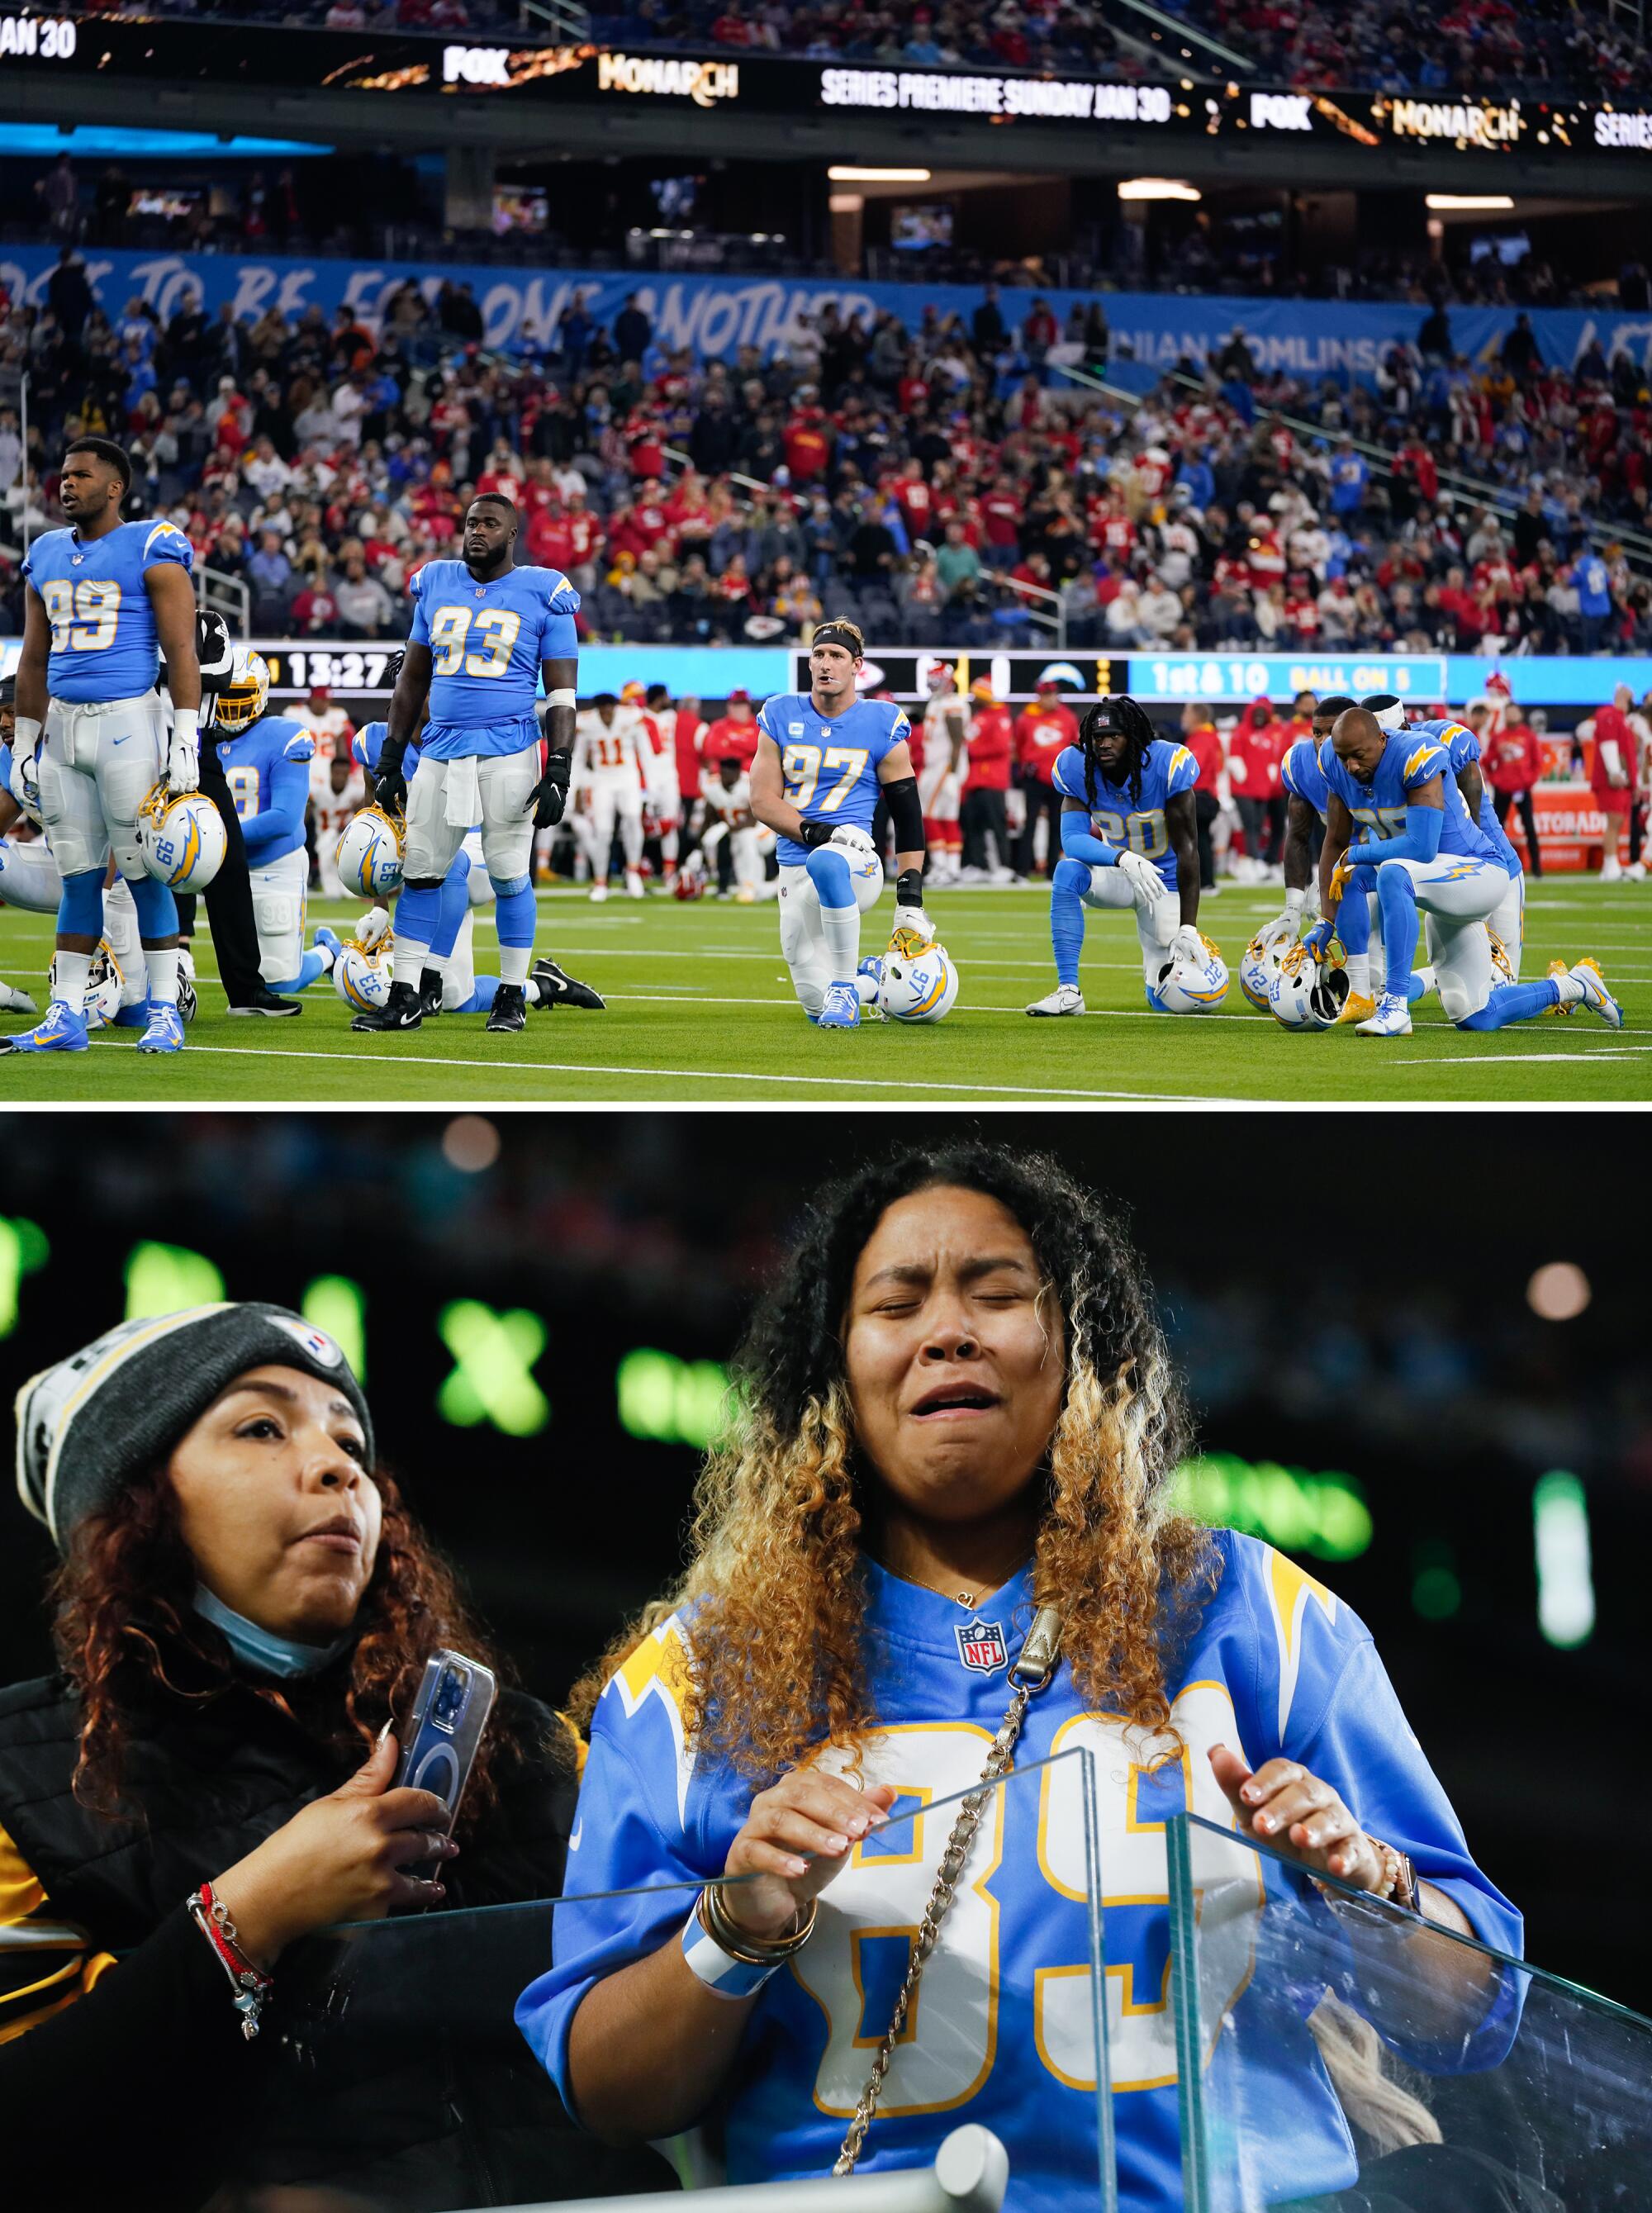 Fans became emotional as doctors tended to Chargers tight end Donald Parham, who suffered an injury in December.